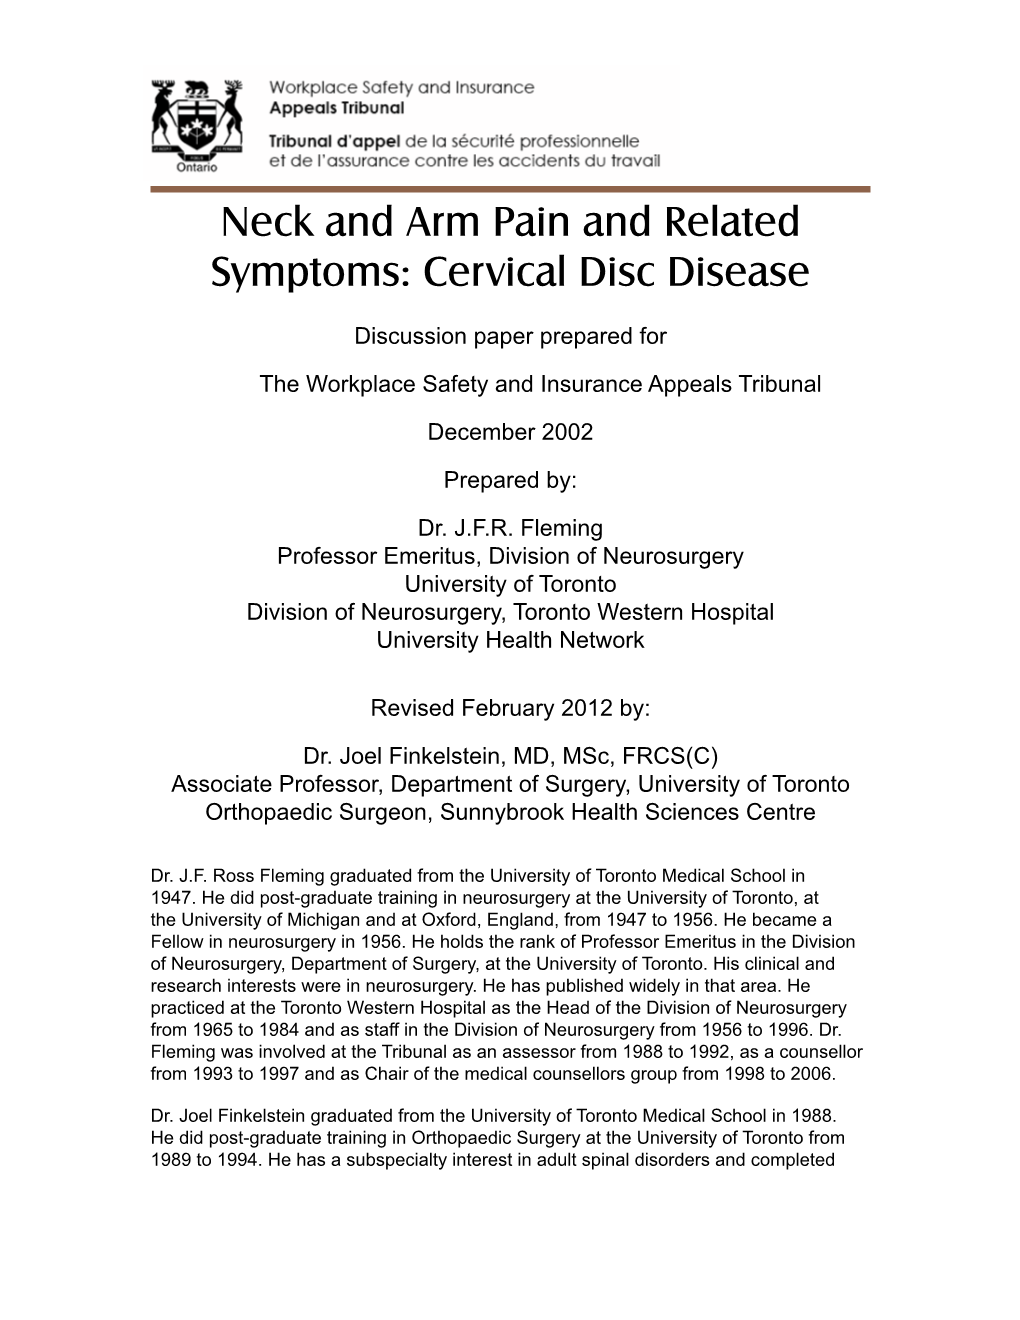 Neck and Arm Pain and Related Symptoms: Cervical Disc Disease